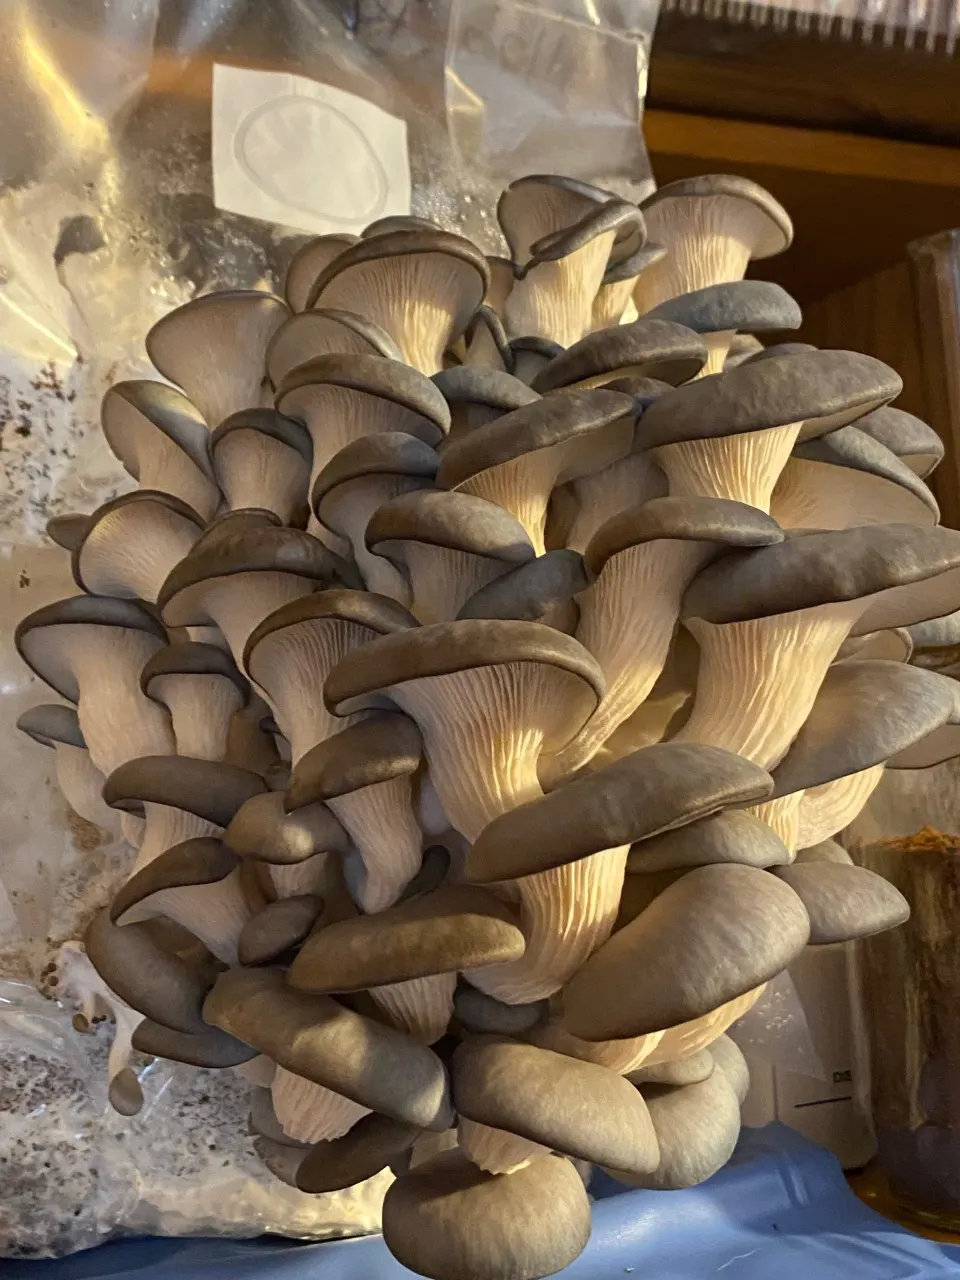 growing oyster mushrooms at home detailed instru 9vo21rry